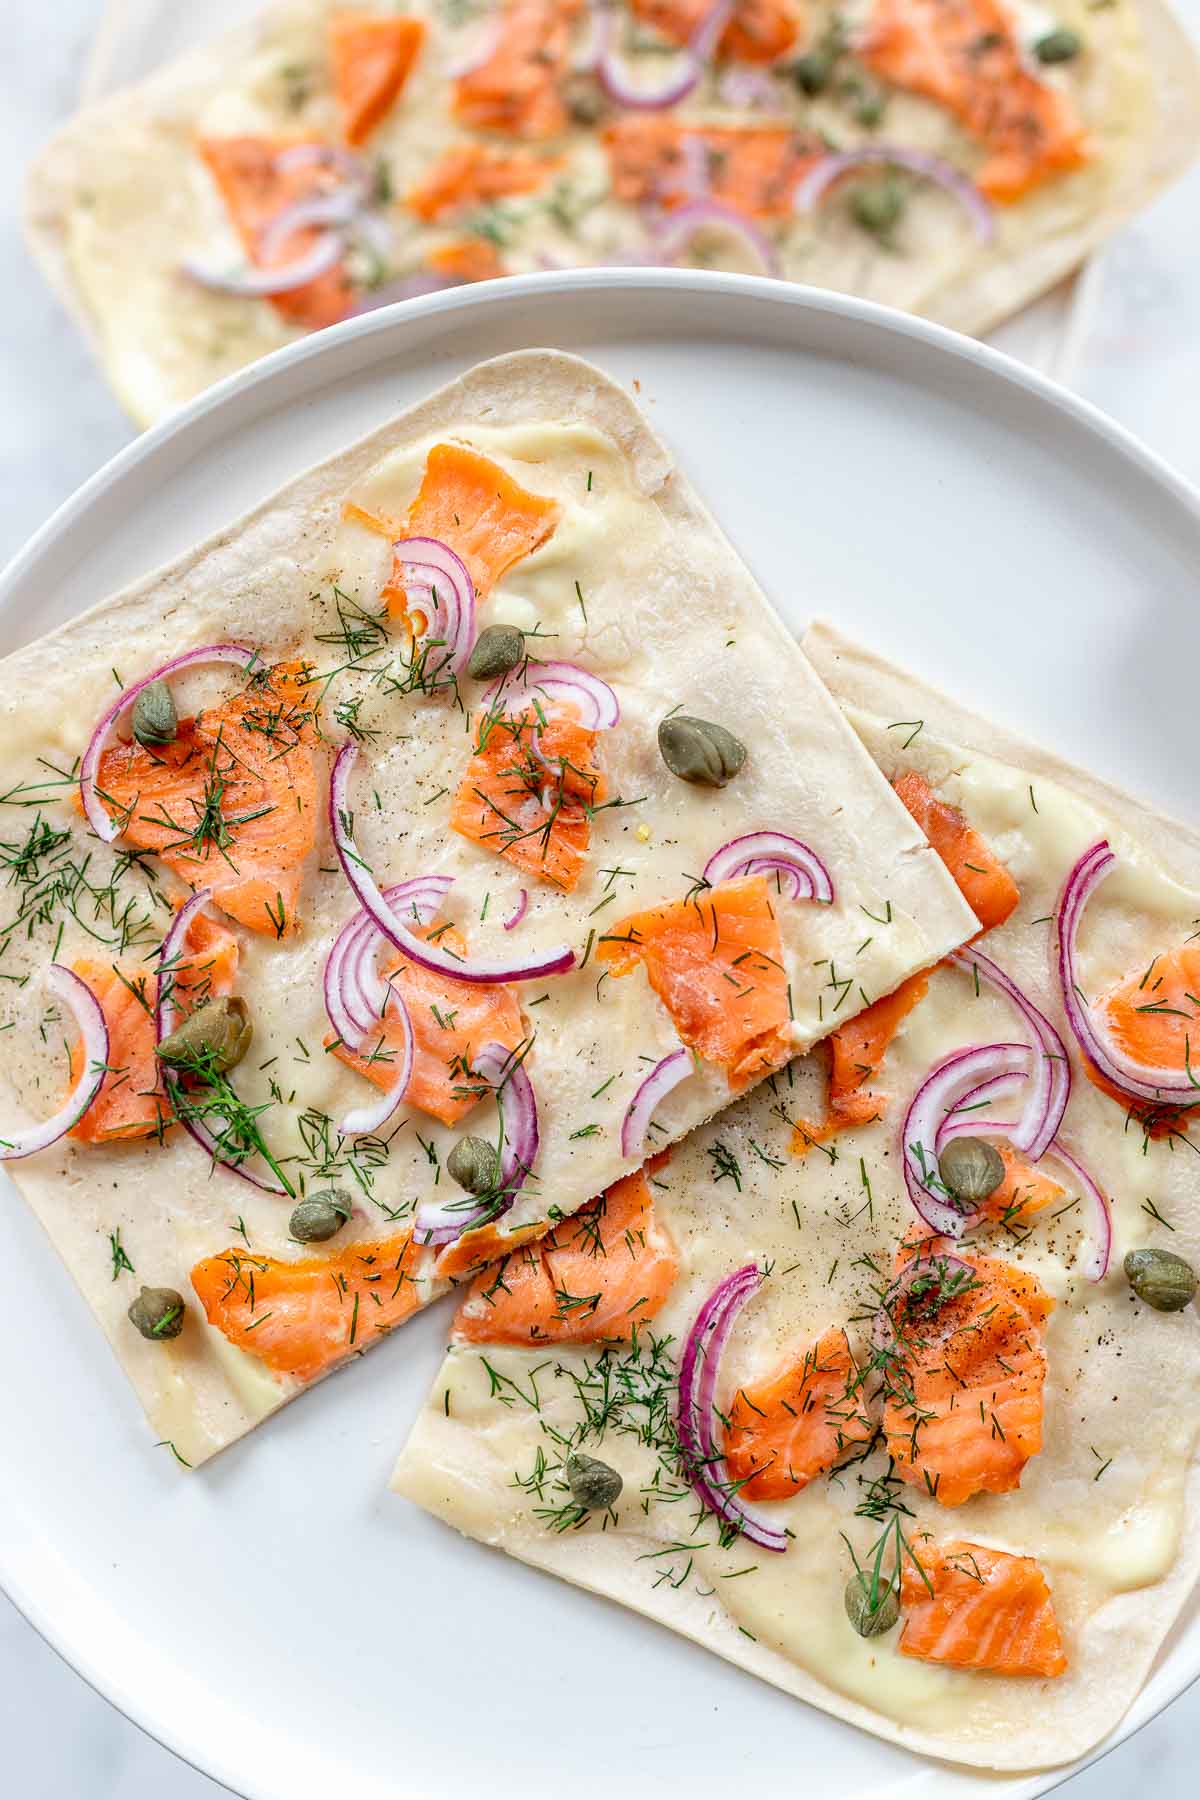 Tarte flambée with salmon, capers, dill and fresh cream